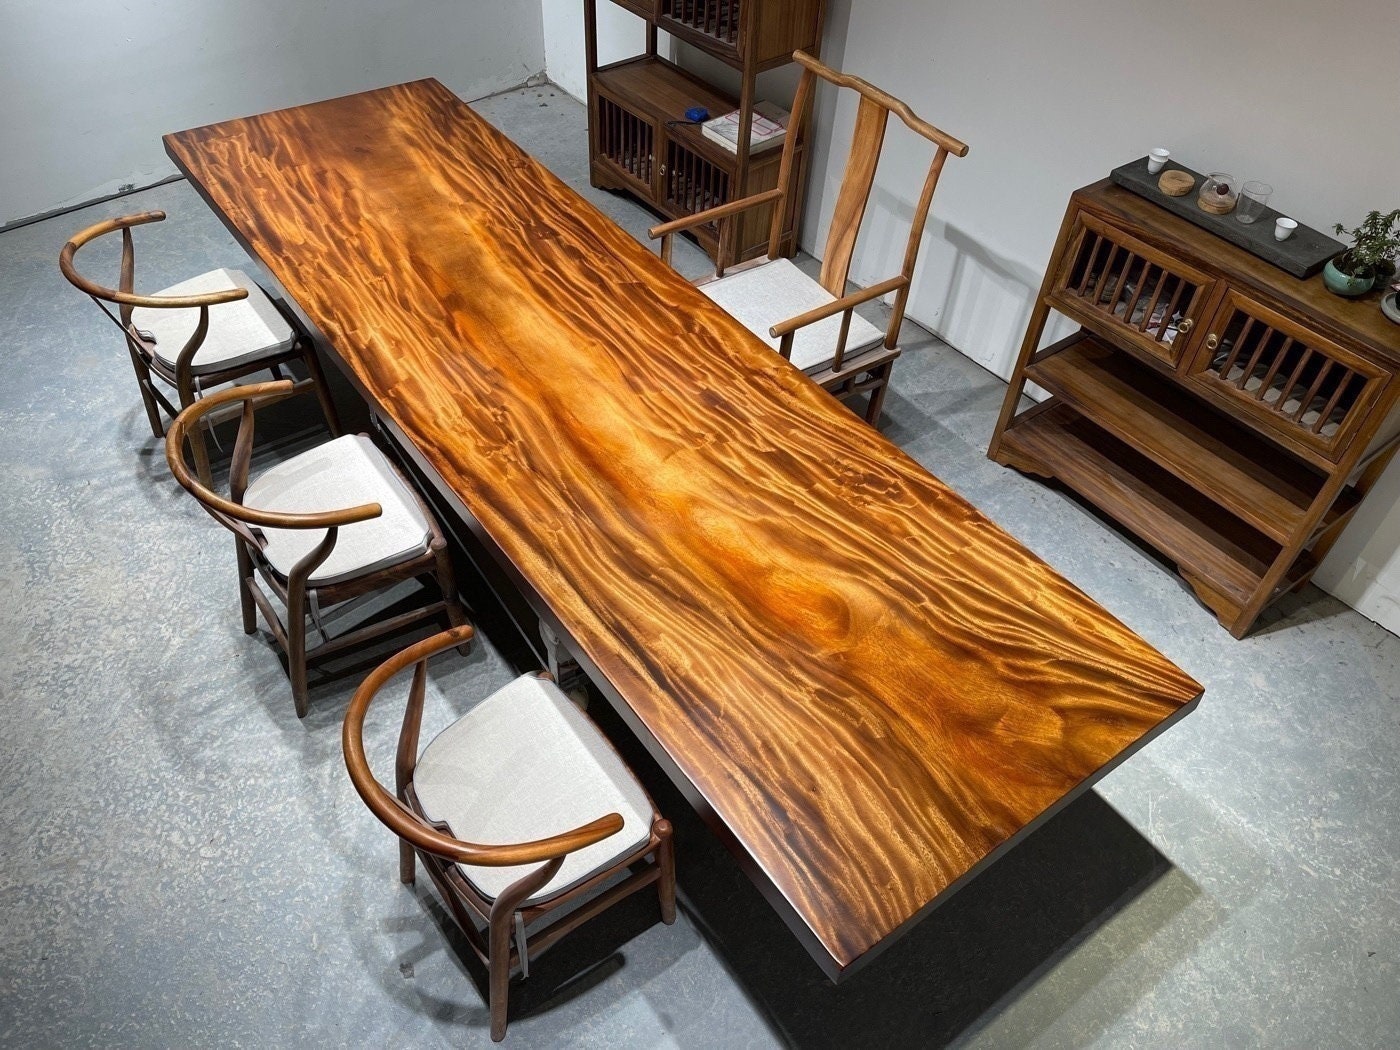 Slab Dining Table, Walnut Dining Table, Live Edge Kitchen Table, Live Edge Dining Table